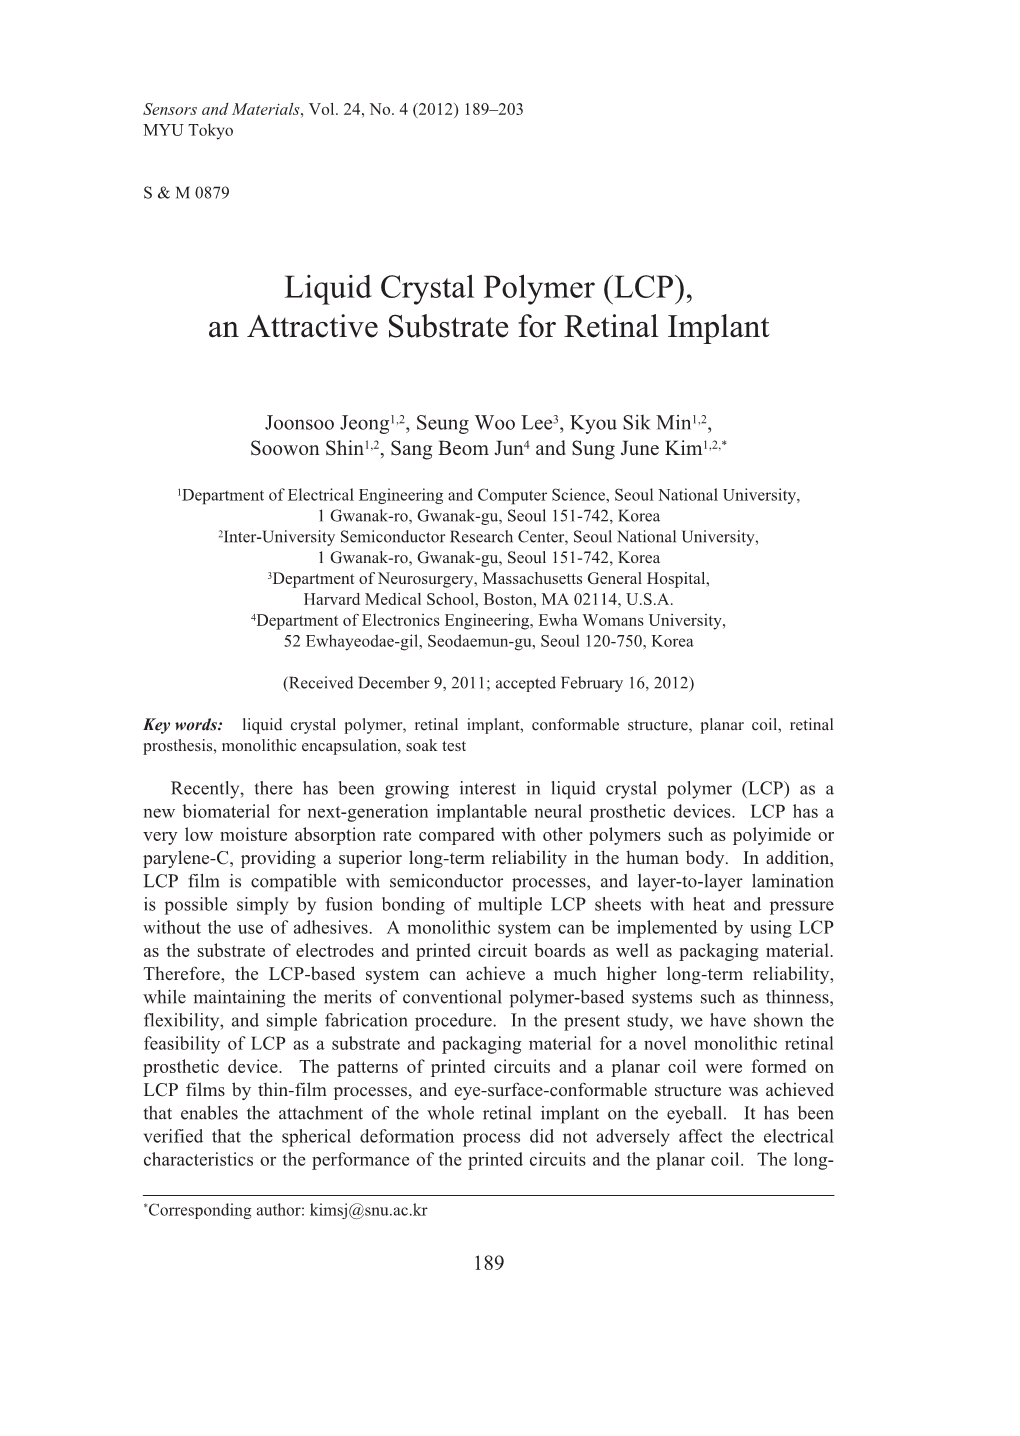 Liquid Crystal Polymer (LCP), an Attractive Substrate for Retinal Implant